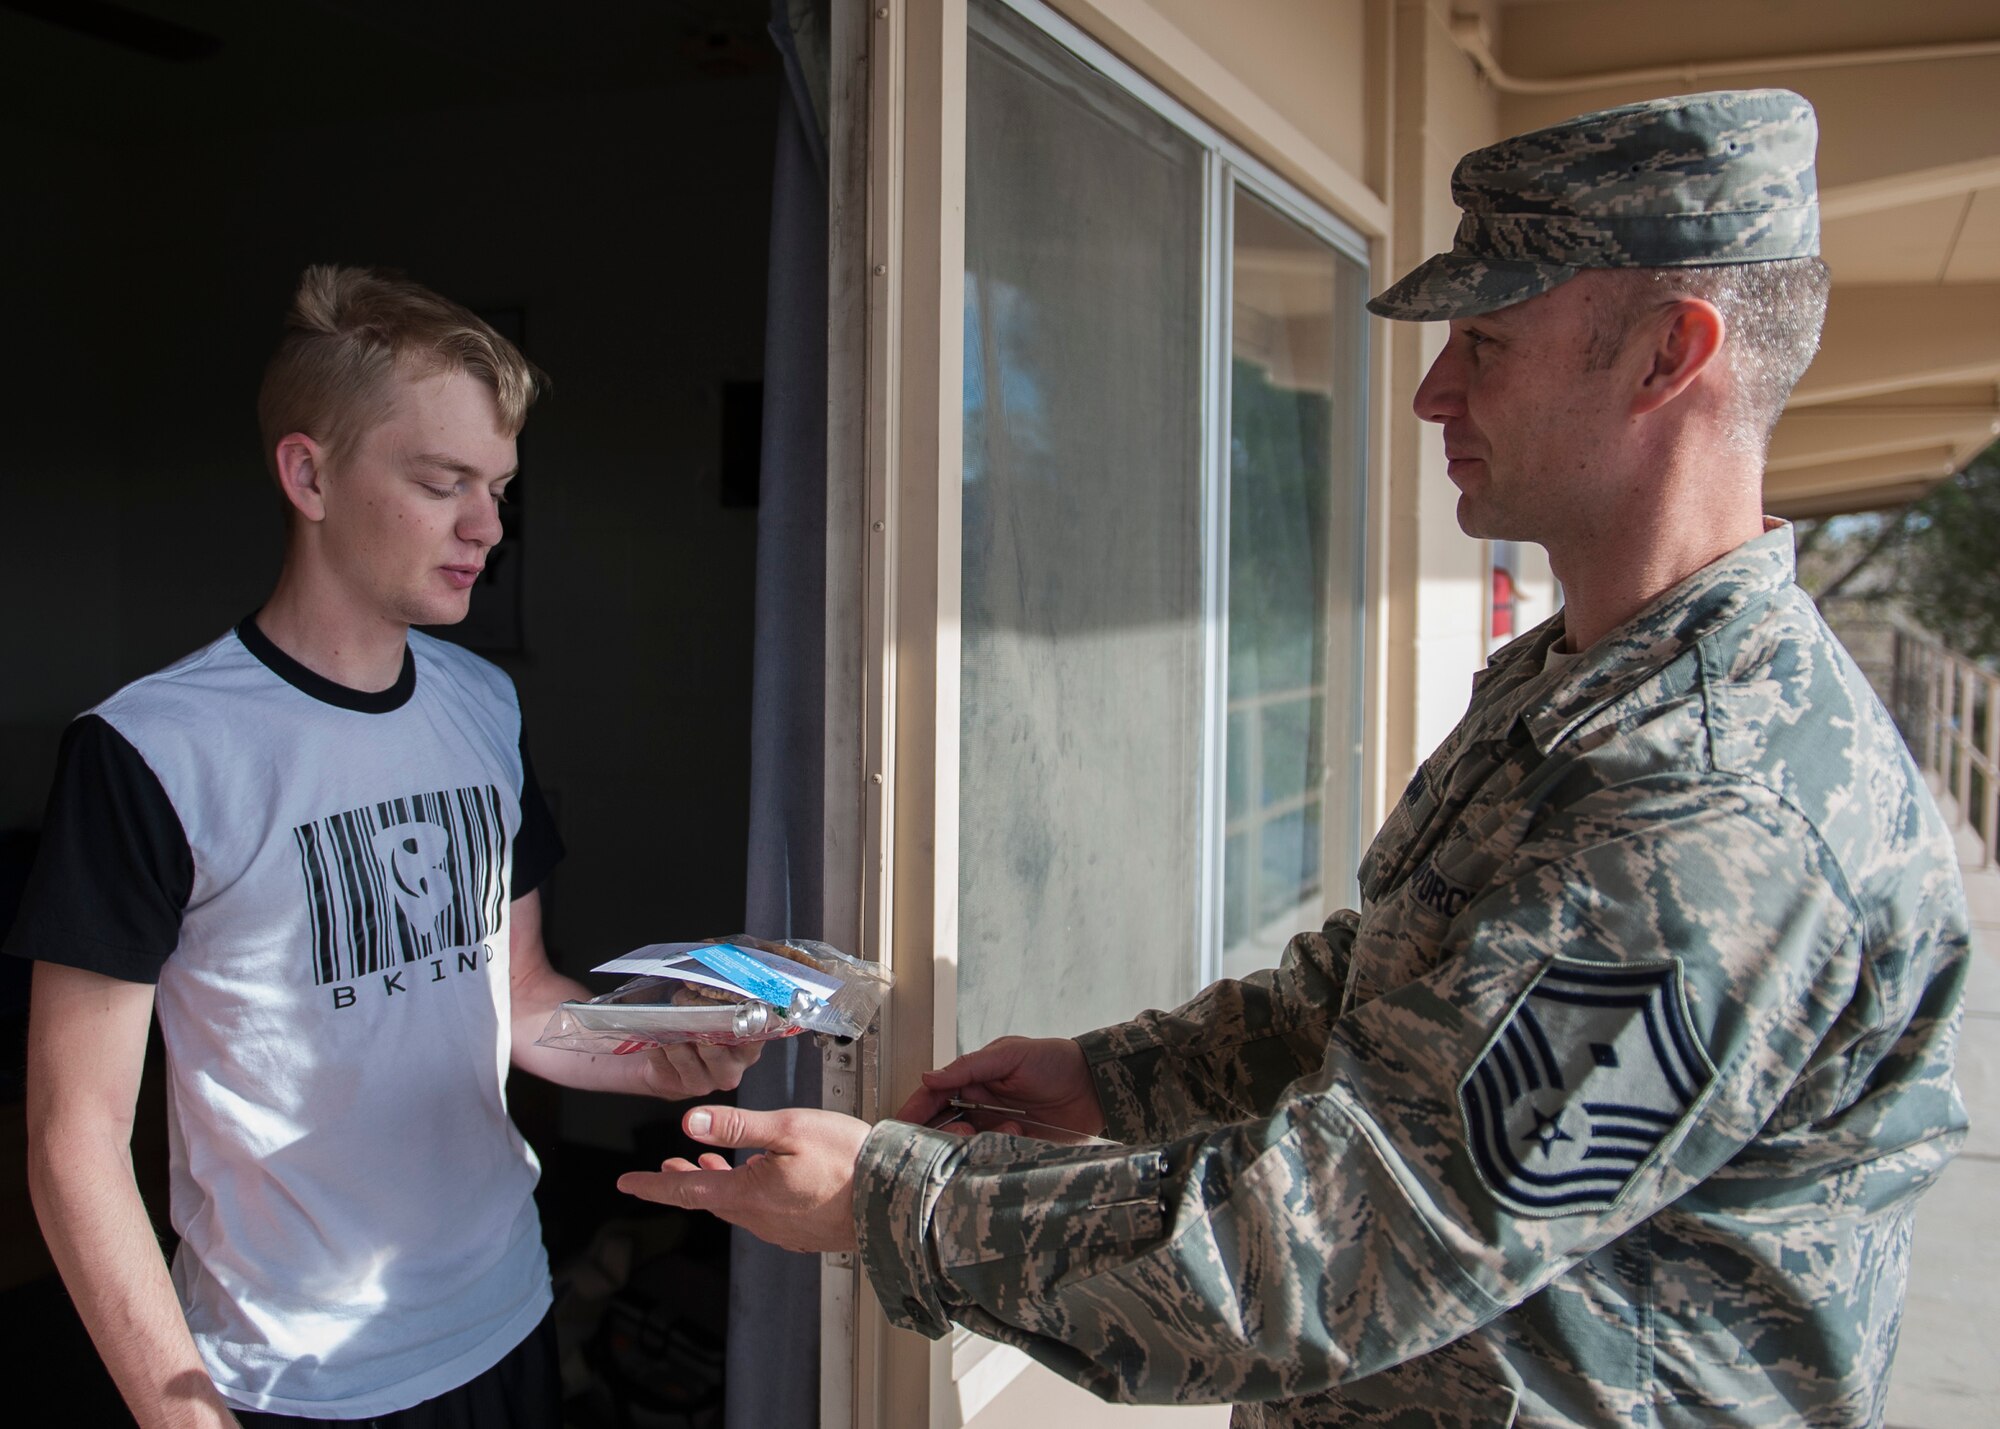 Airman 1st Class Bradley Greer, 99th Security Forces Squadron member, receives a cookie package from Senior Master Sgt. Christopher McEwan, 99th SFS first sergeant, during the Airman Cookie Drive at Nellis Air Force Base, Nev., Dec. 14, 2015. McEwan and other first sergeants delivered more than 12,000 cookies to Airmen living in the Nellis AFB dormitories. (U.S. Air Force photo by Staff Sgt. Siuta B. Ika)